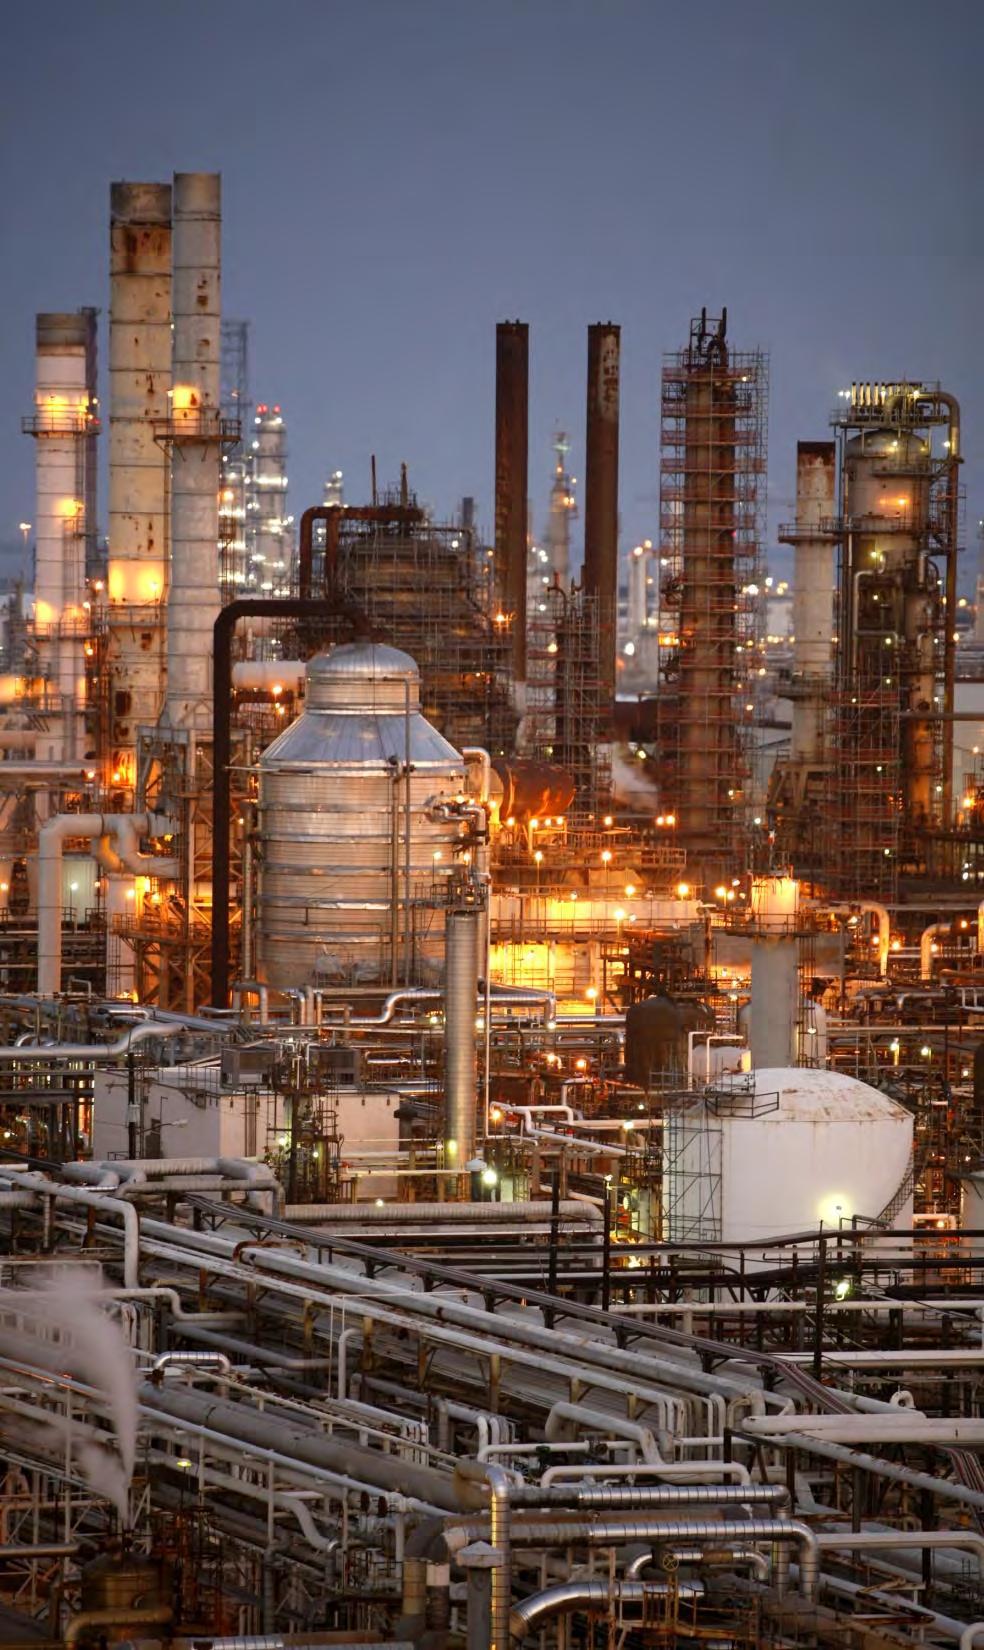 Continuous Emissions Monitoring Systems Engineering & Design For PetroChem Processes a technical solution to